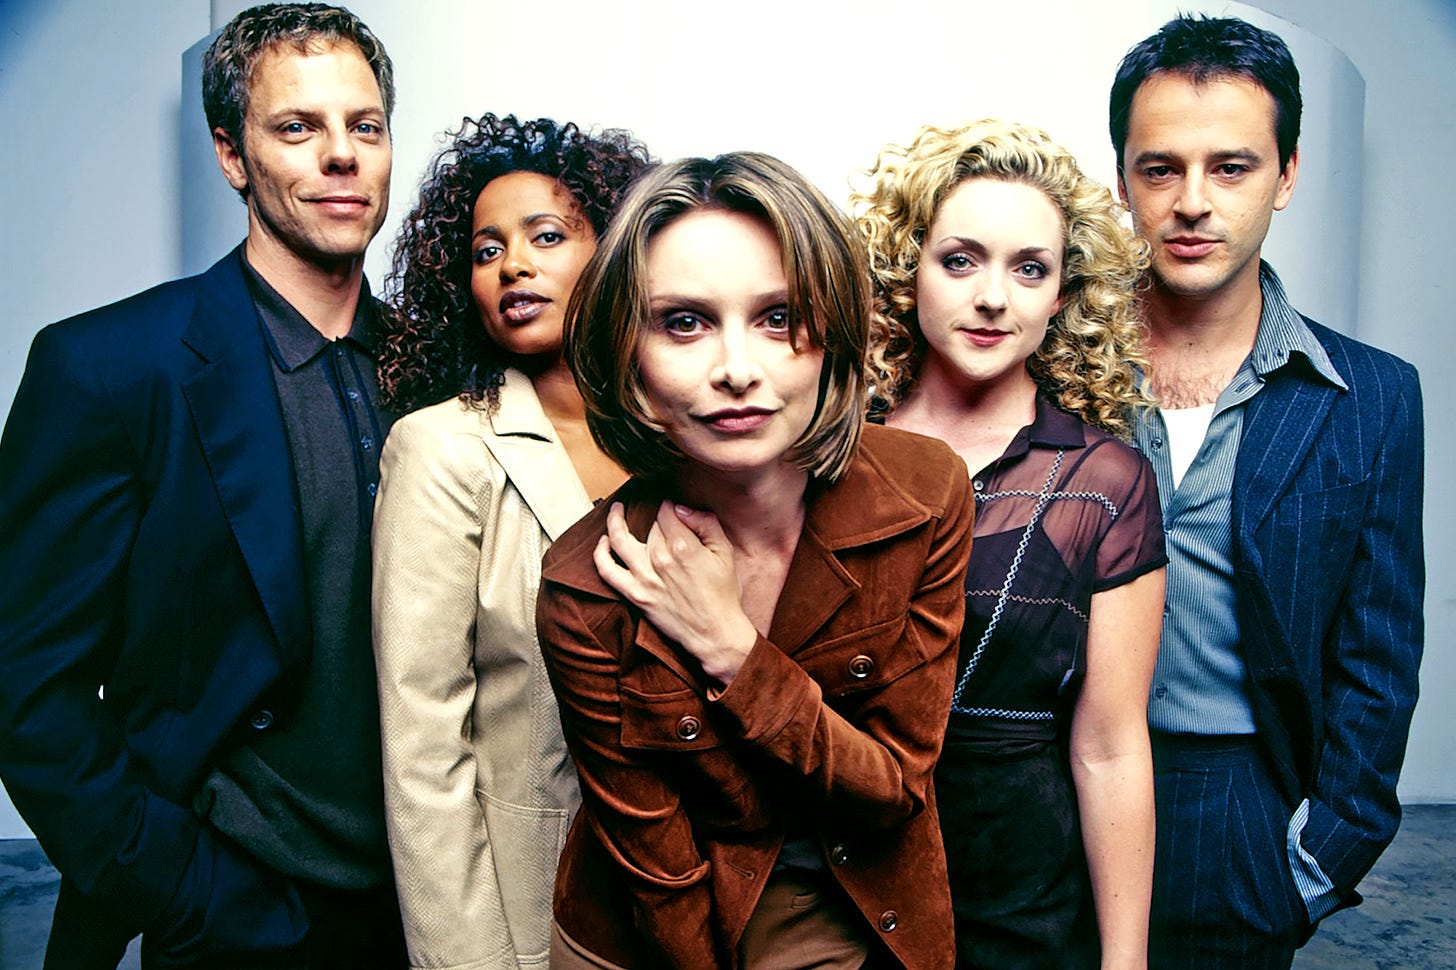 Ally McBeal sequel in the works with Black female lead | EW.com